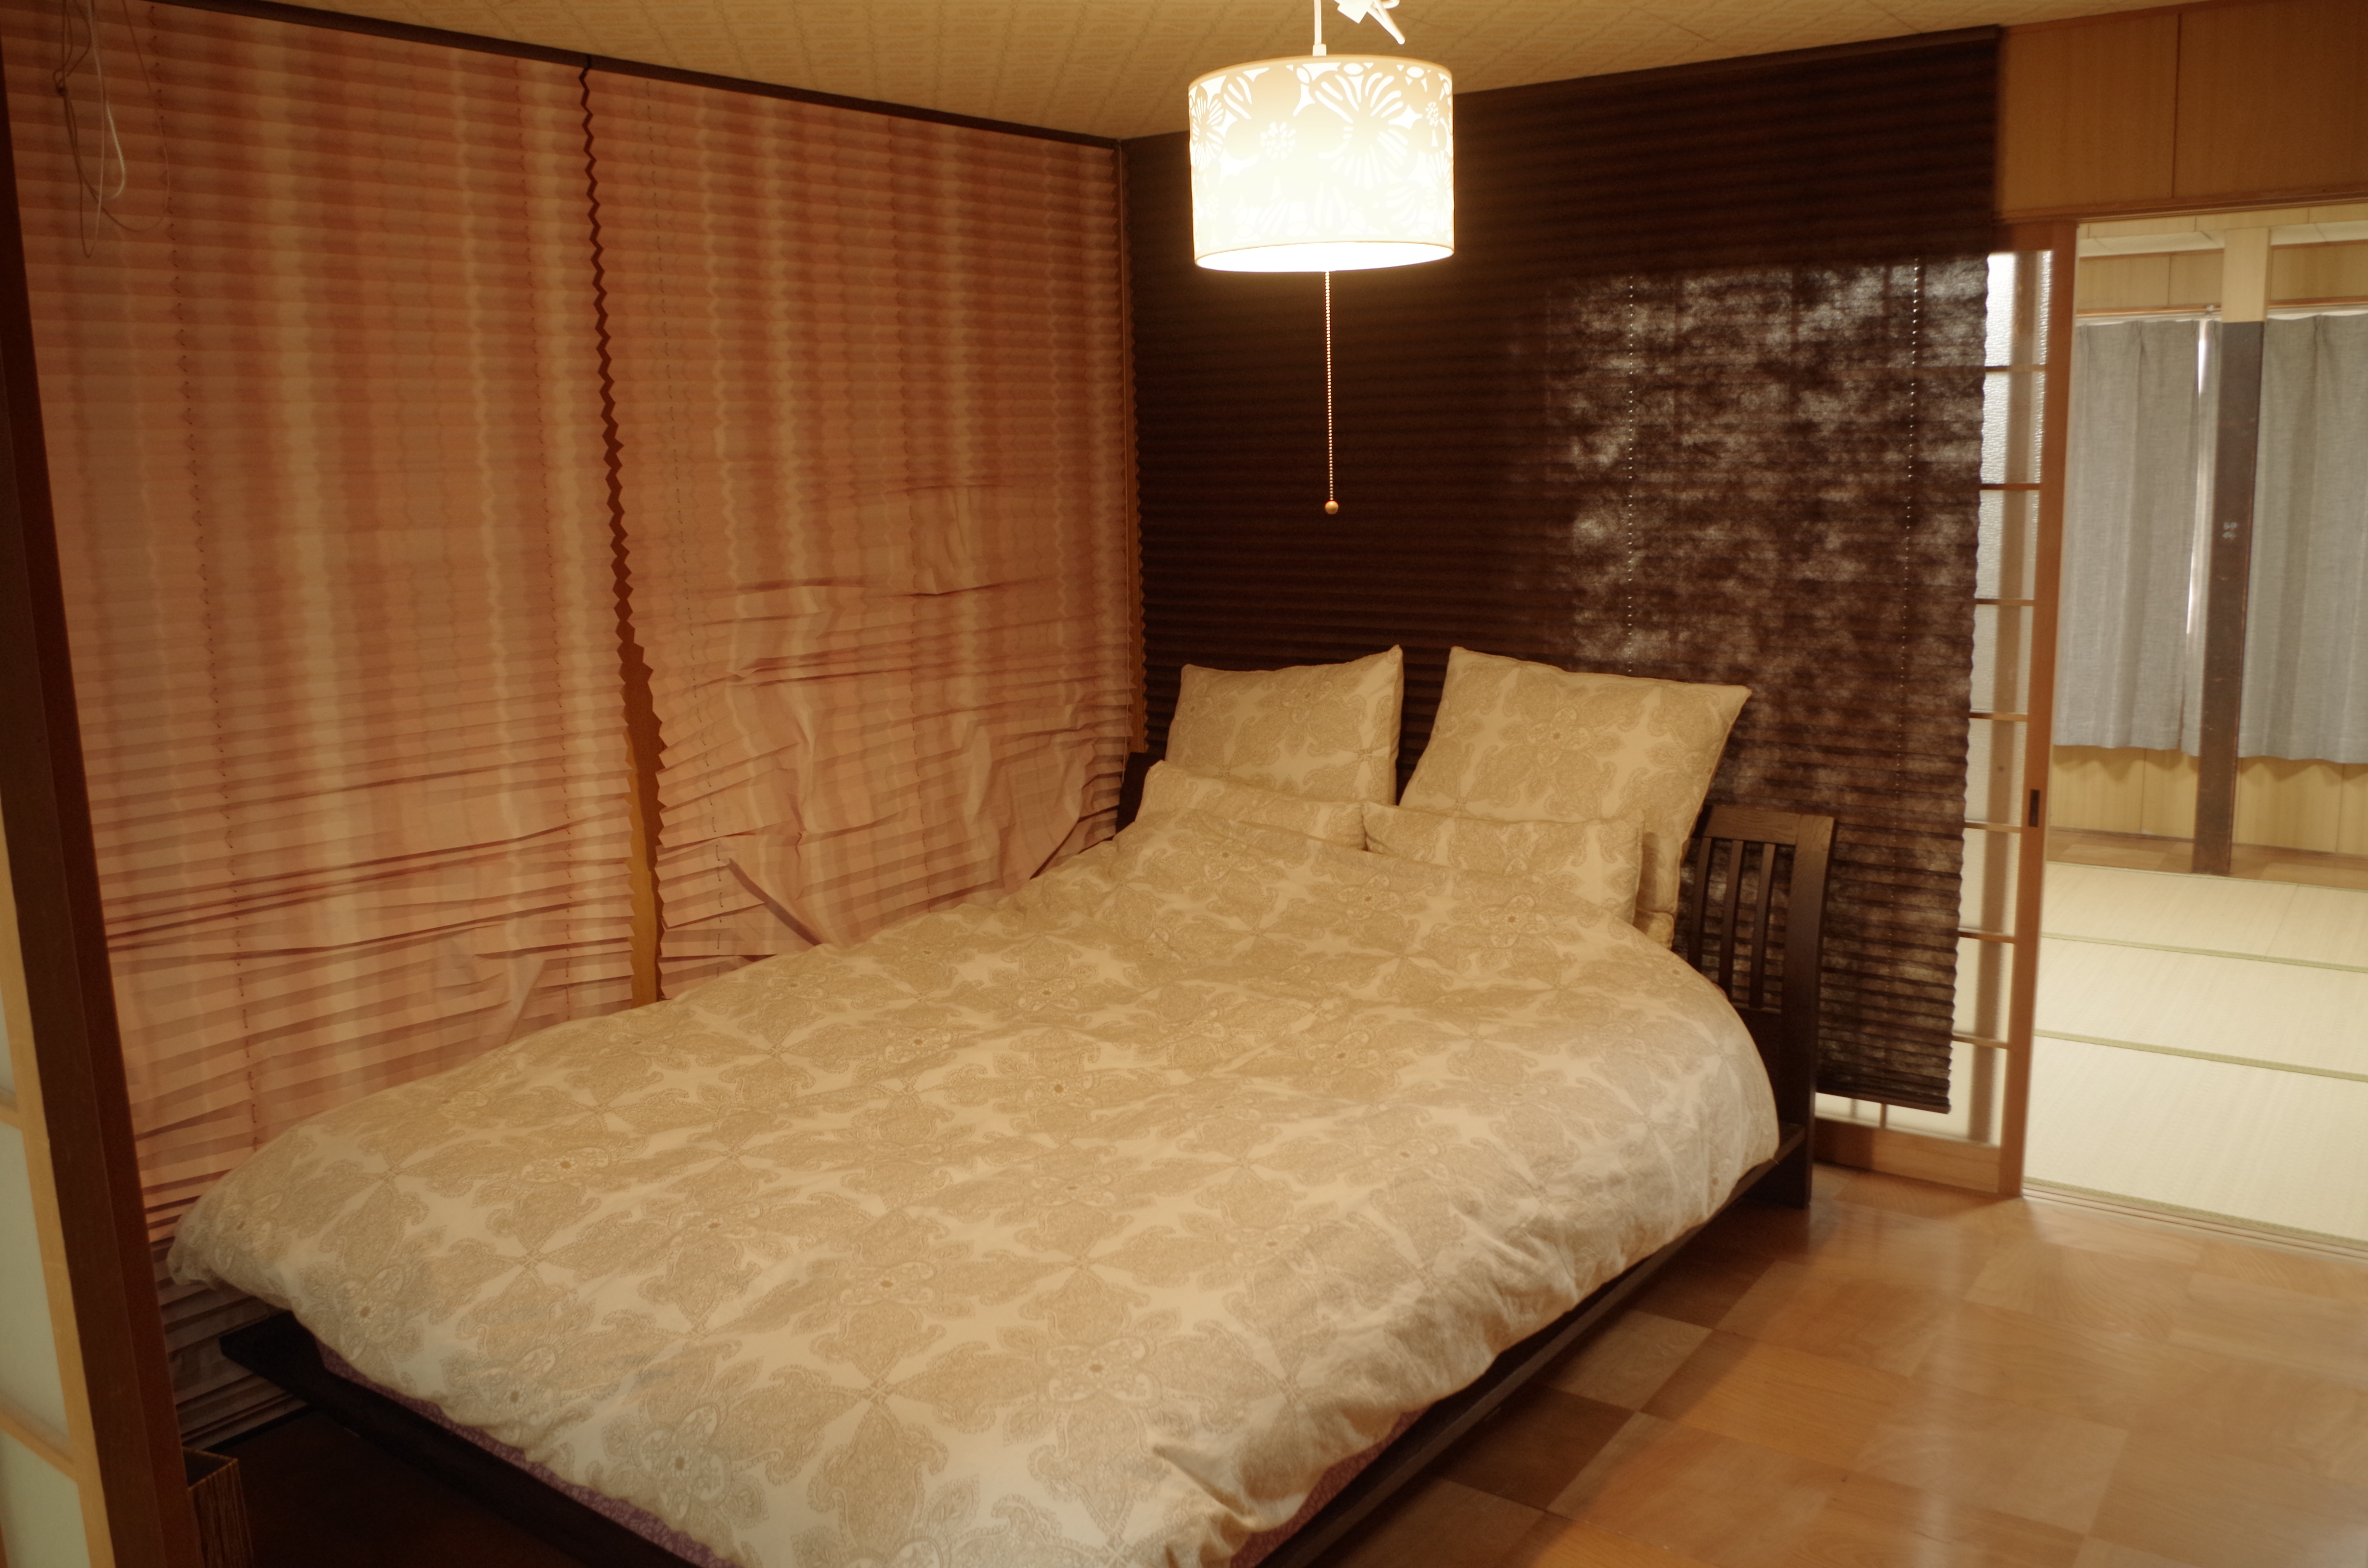 Bed room with semi double bed.